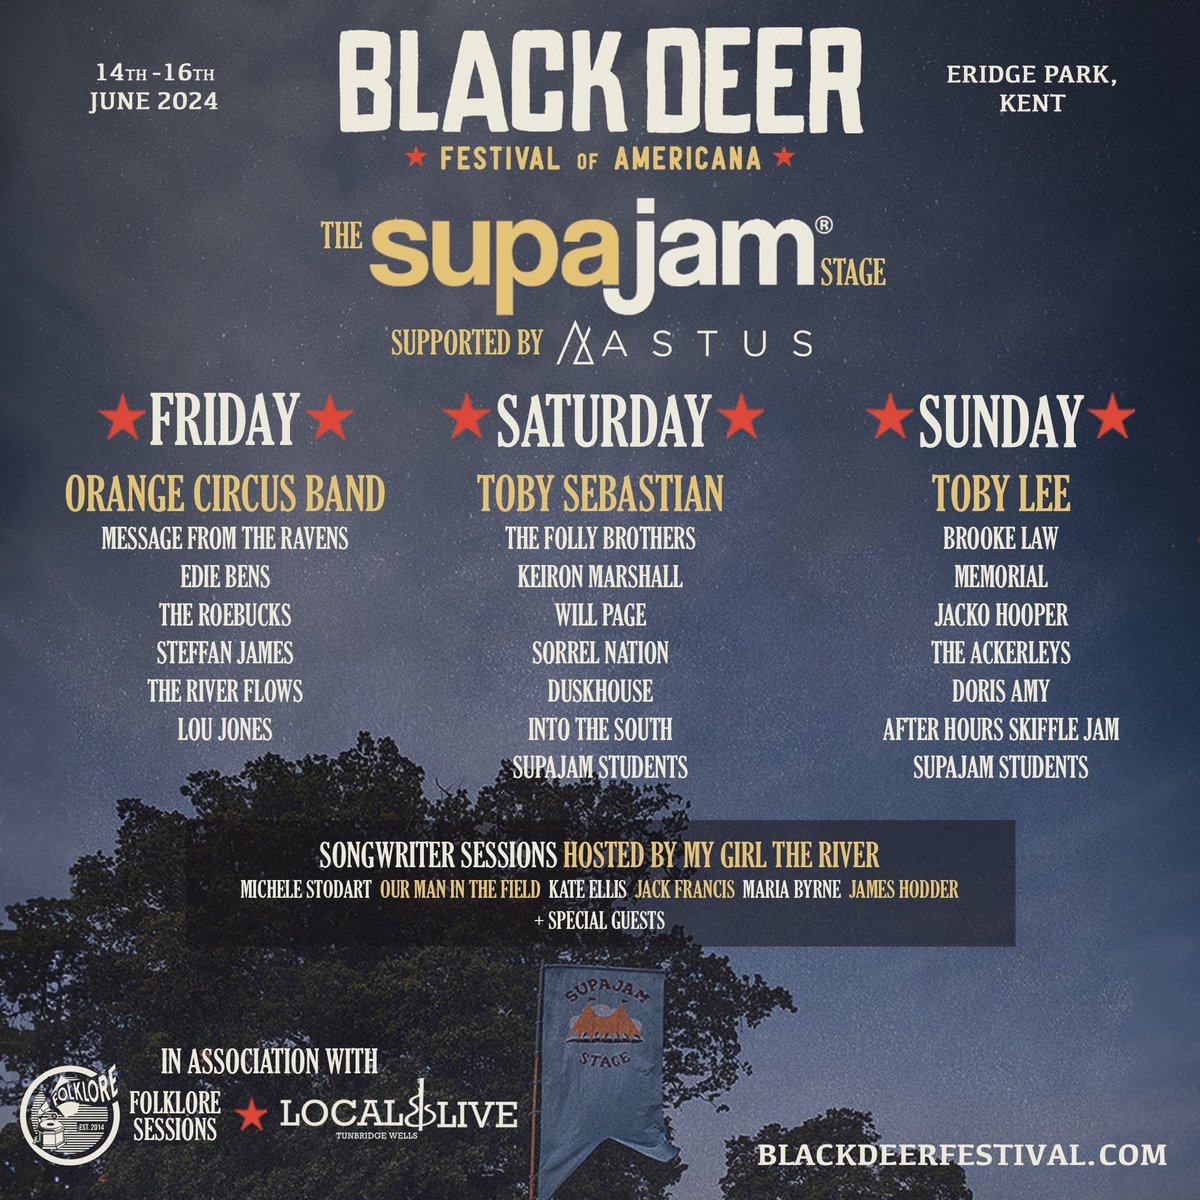 🎺🎺🎺🎺🎺
News! I will be returning to the @supajamemm stage supported by Astus at this years @blackdeerfest 🤩 I am so excited & proud to support the amazing work SupaJam does with neurodivergent young people with a passion for music. A fab lineup is on offer! Get tix now 🥰